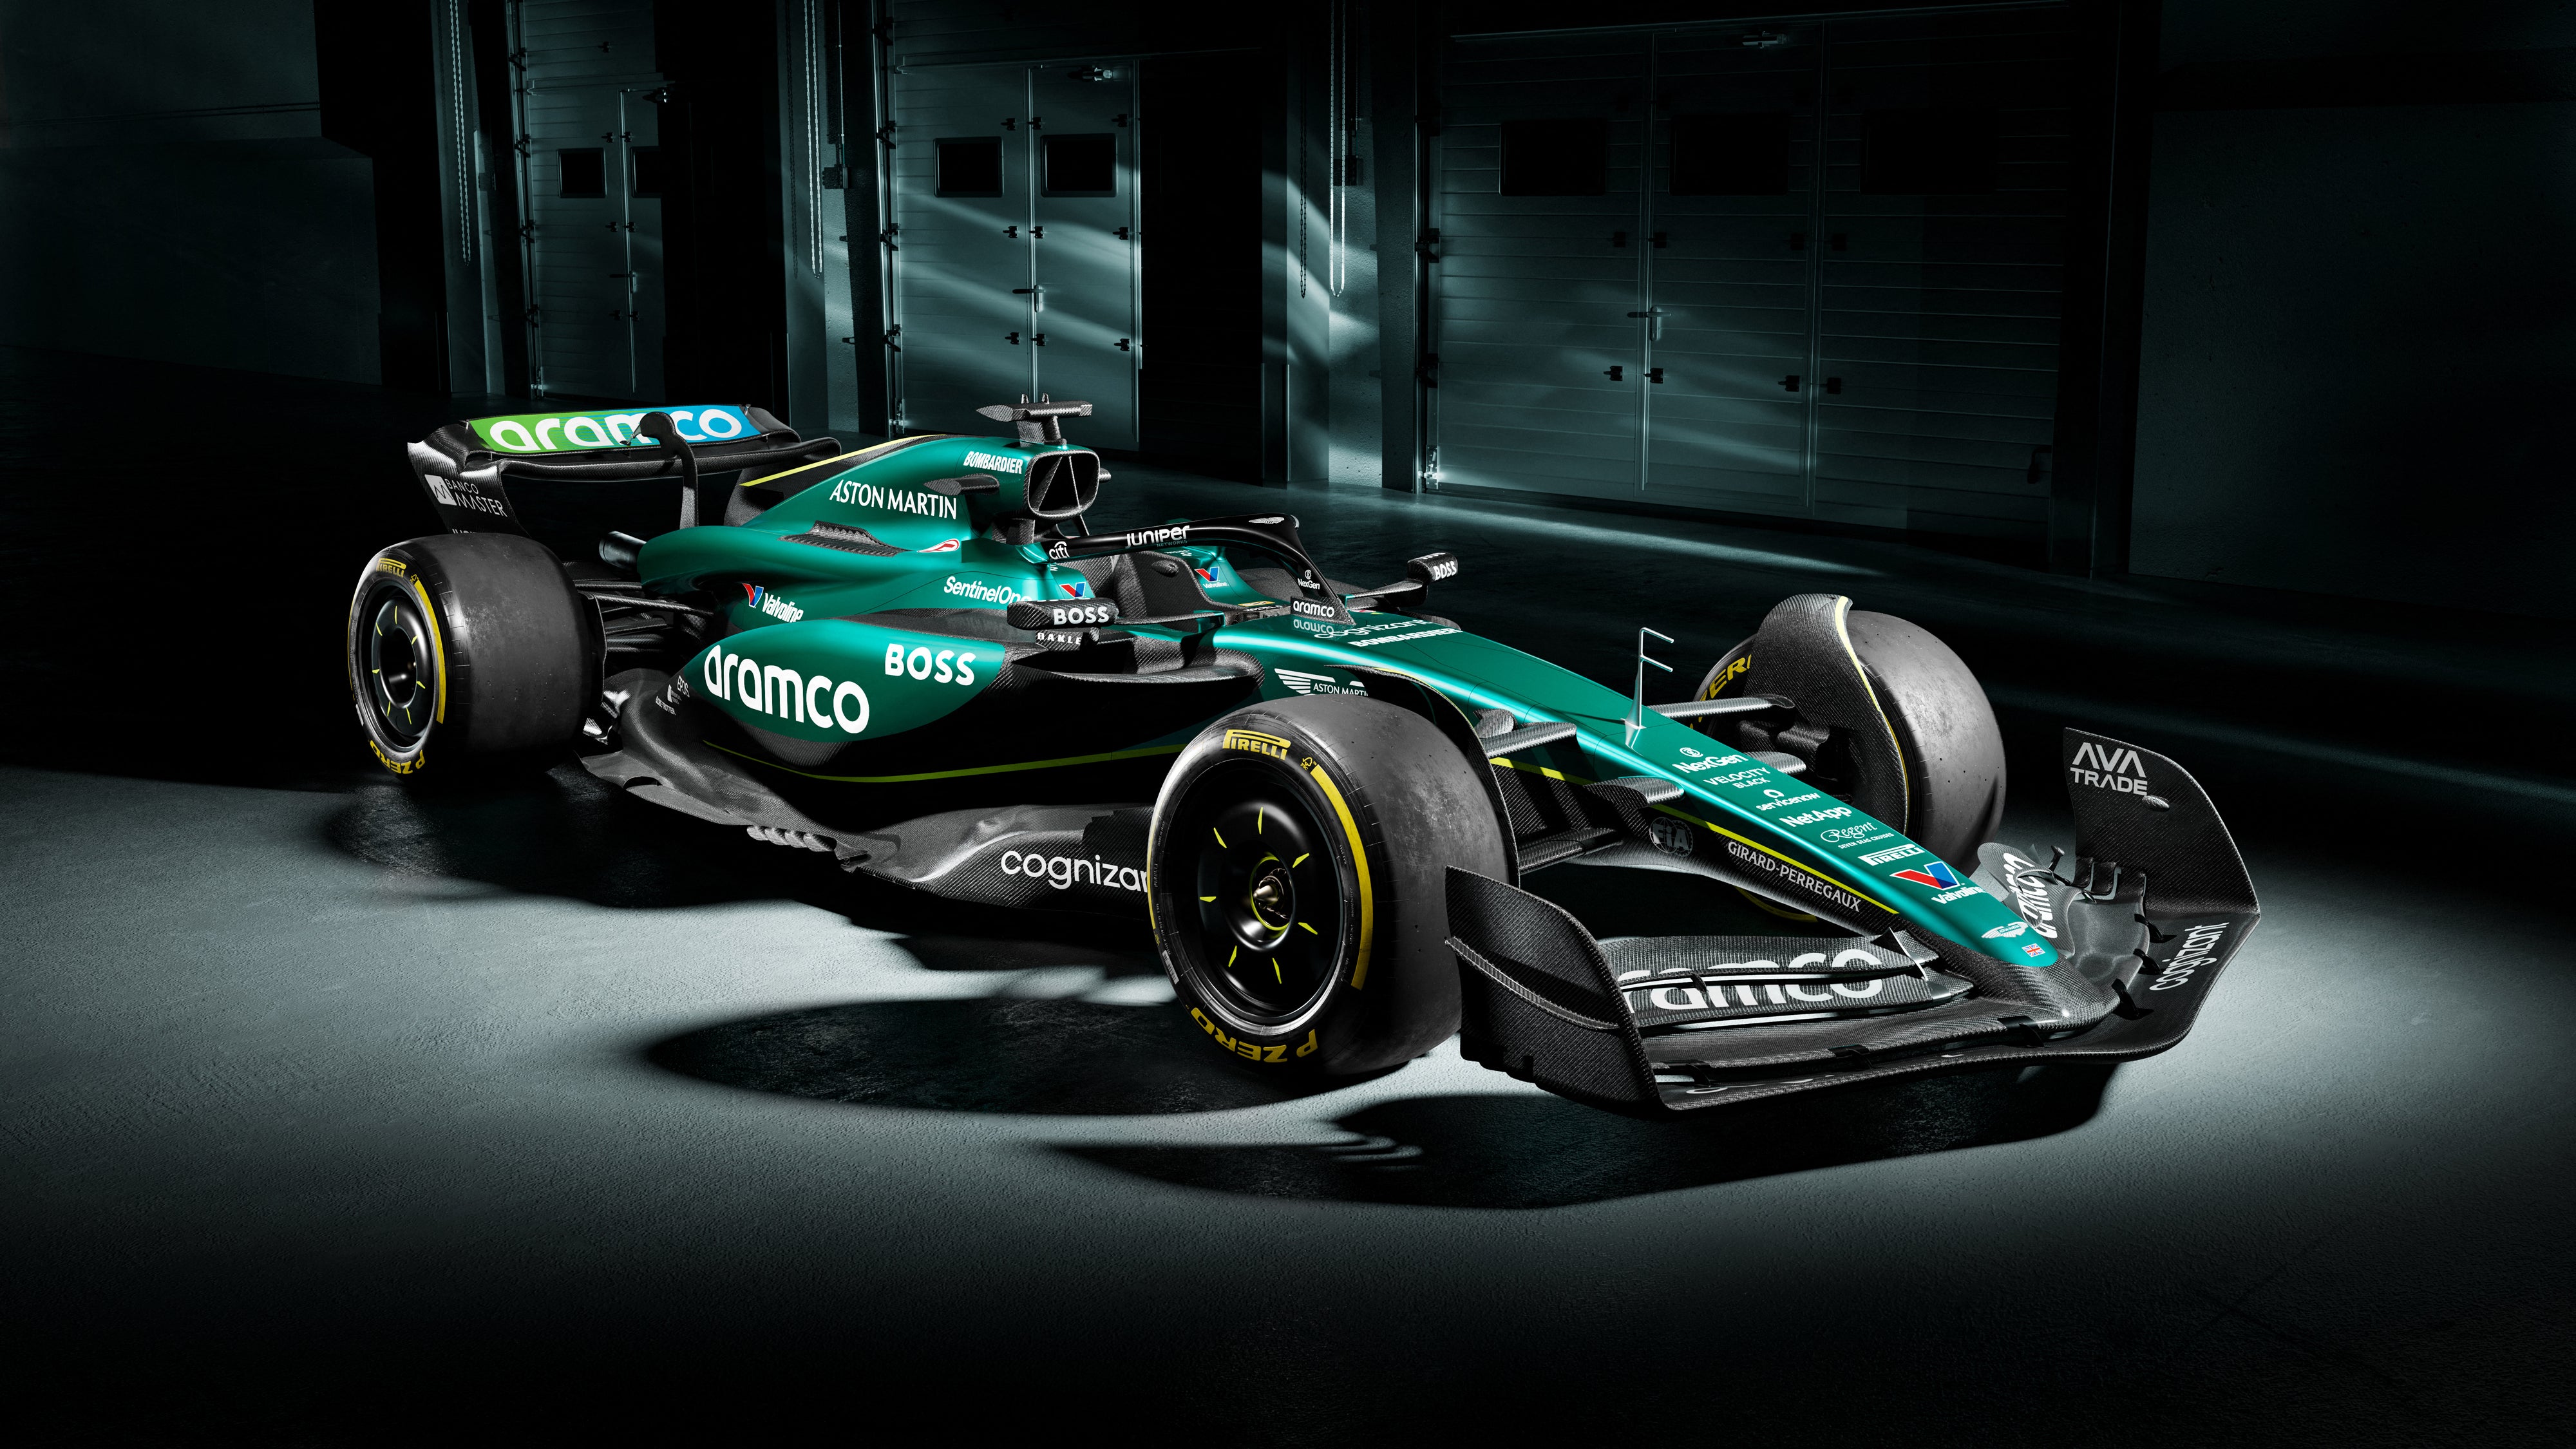 Aston Martin have launched their F1 car for next season